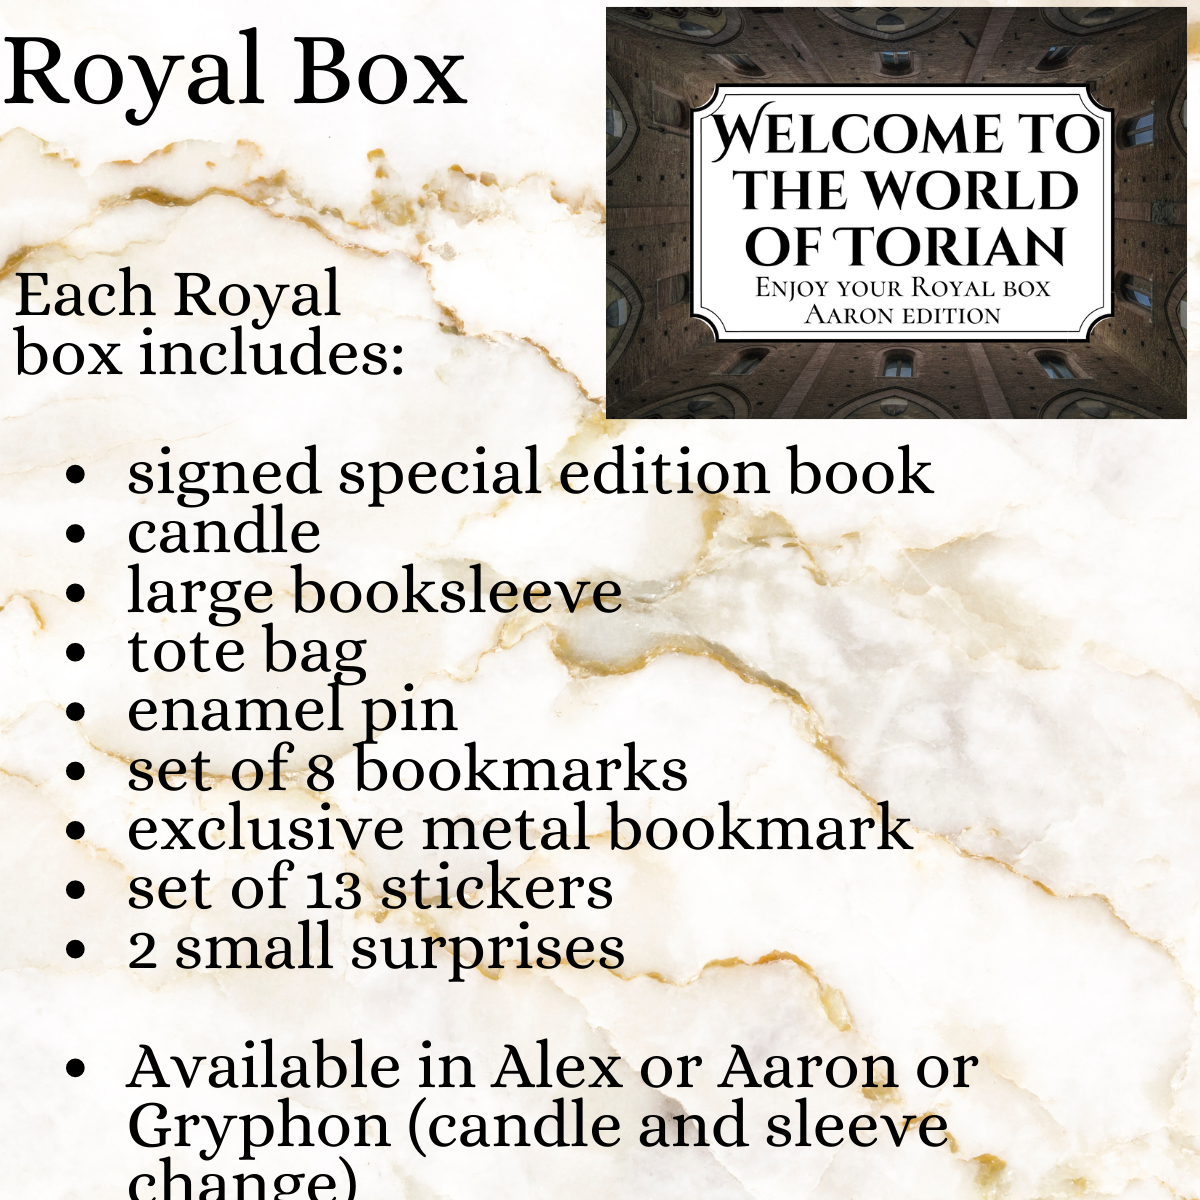 Image of Royal box logo - includes list of box items: signed special edition book, exclusive metal bookmark, candle, tote bag, booksleeve,  enamel pin, set of 8 bookmarks, set of 13 stickers,2 small surprises - available in Alex, Aaron or Gryphon